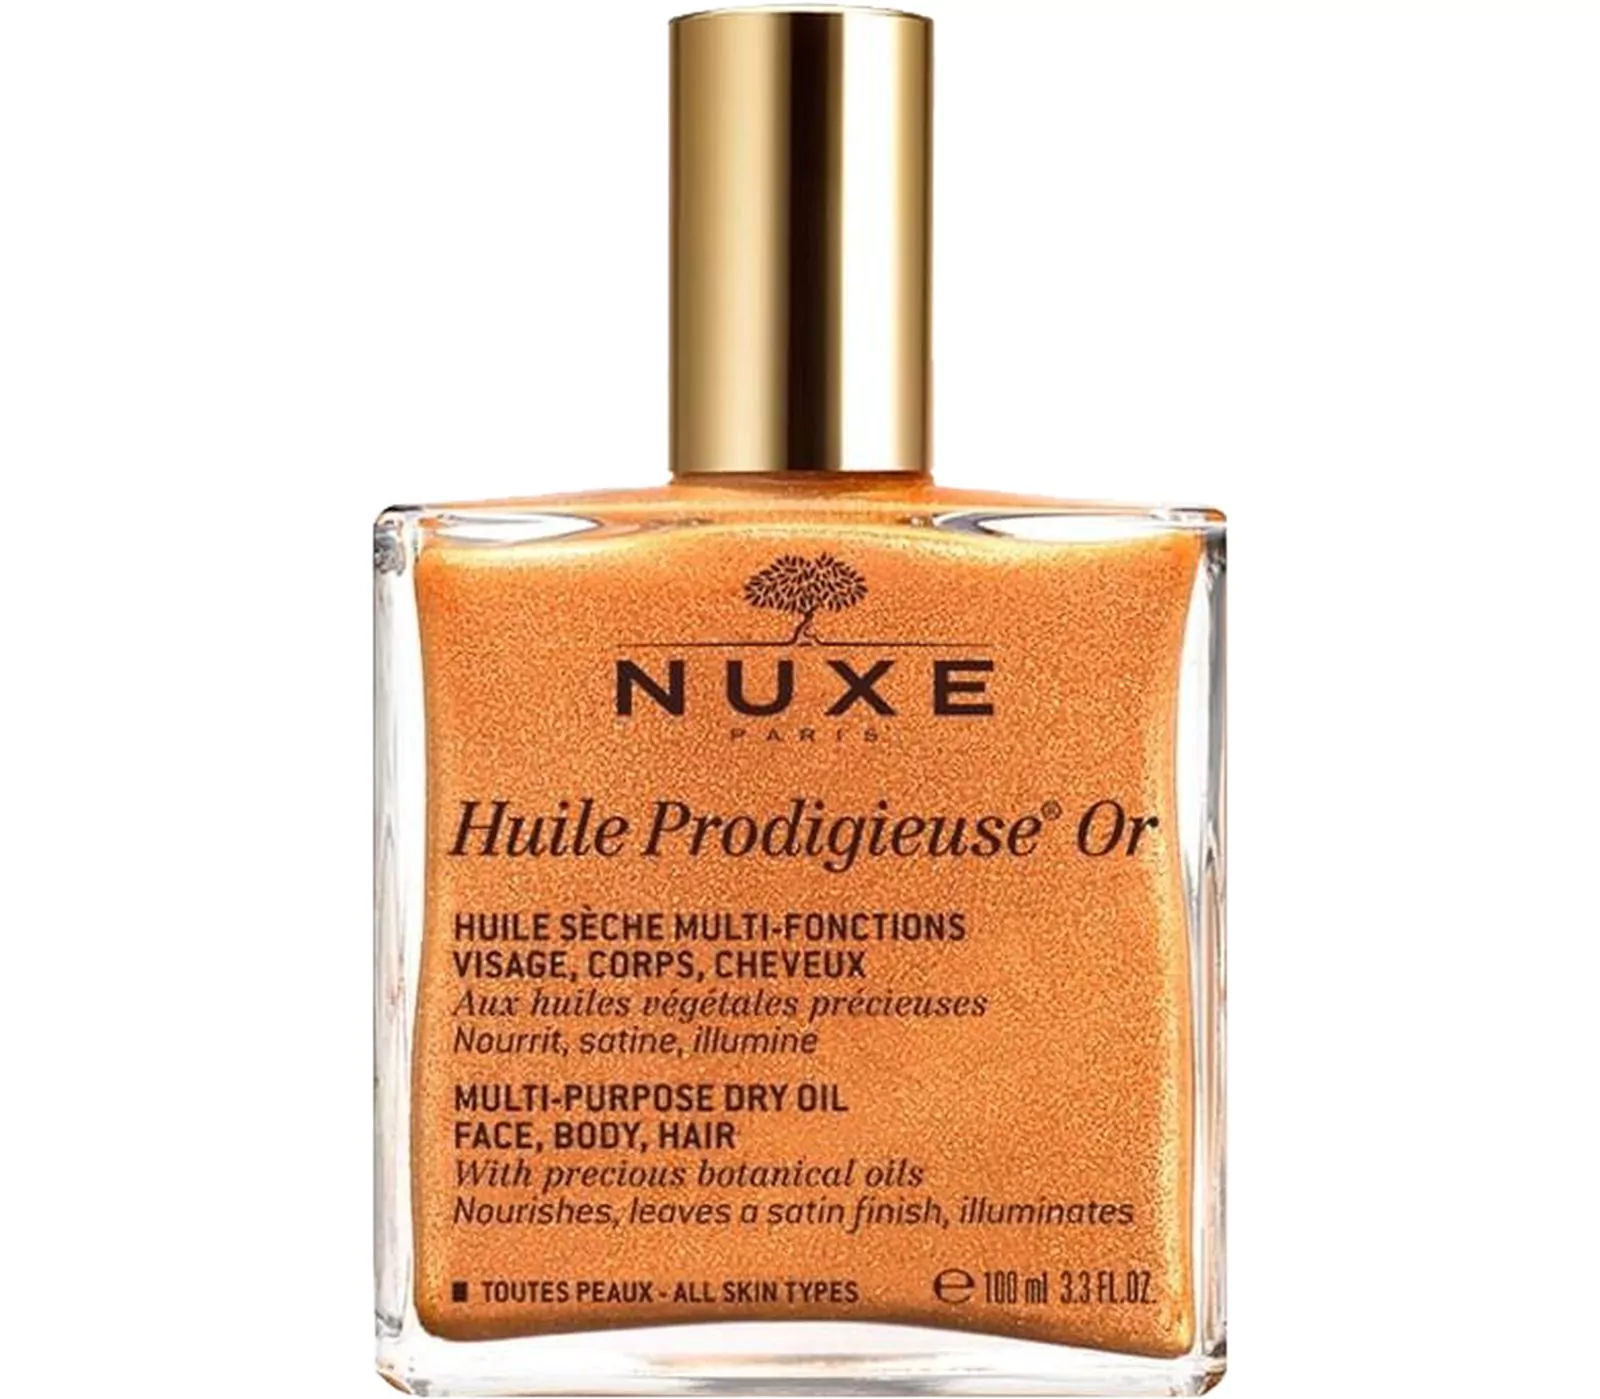 NUXE, масло для тела Huile Prodigieuse OR Multi-Purpose Dry Oil